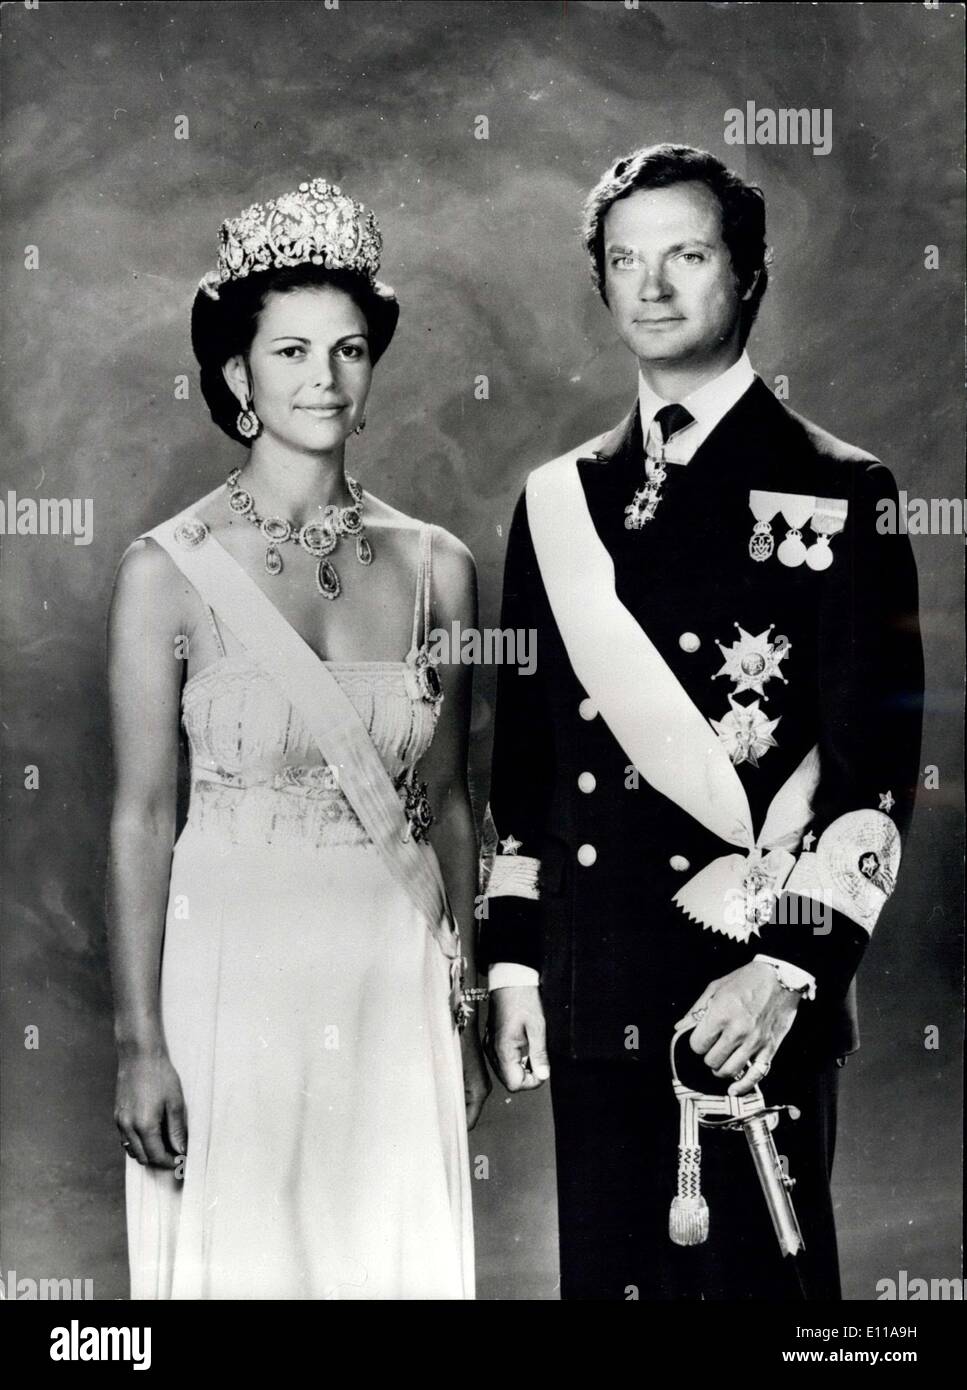 Oct. 08, 1976 - New Official Photographs Of The King And Queen Of Sweden. Photo shows The latest official photograph of King Carl Gustaf and Queen Silvia of Sweden, taken by photographer Lennart Nilsson. Stock Photo